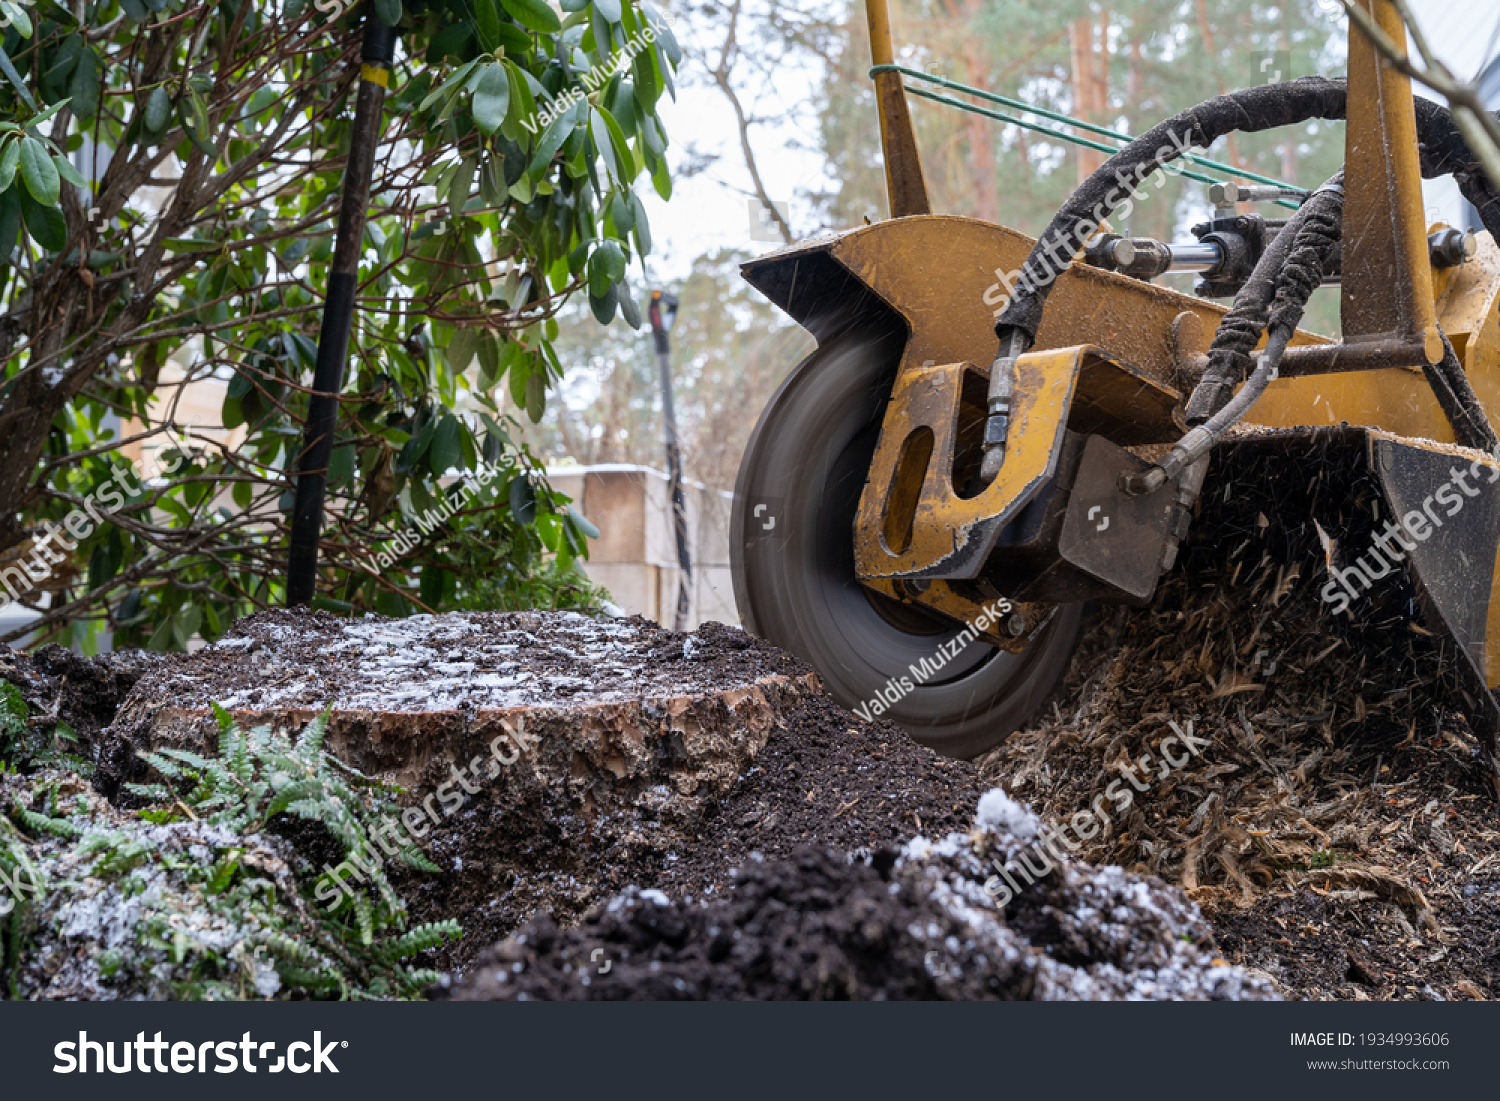 Stump grinding with a view from the right where the cutting disc is visible in close proximity. During the grinding process, the stump shavings fly through the air.  #1934993606